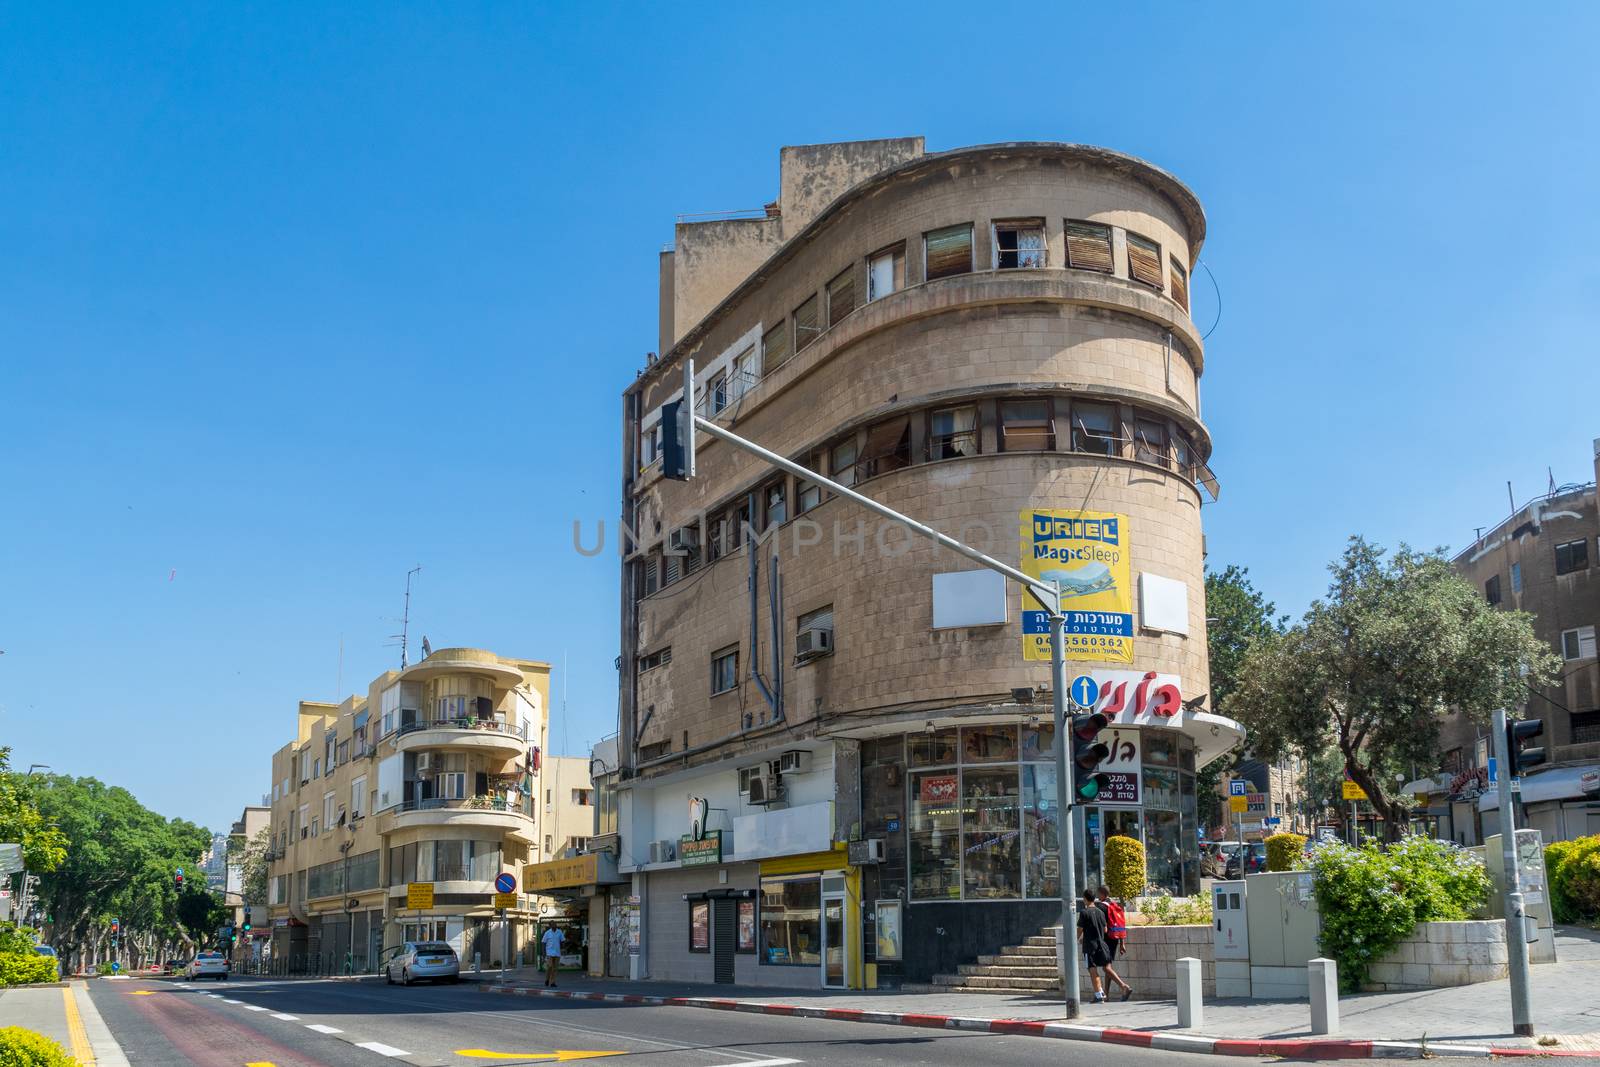 Buildings with mixture of international and Arabic styles, Hadar by RnDmS